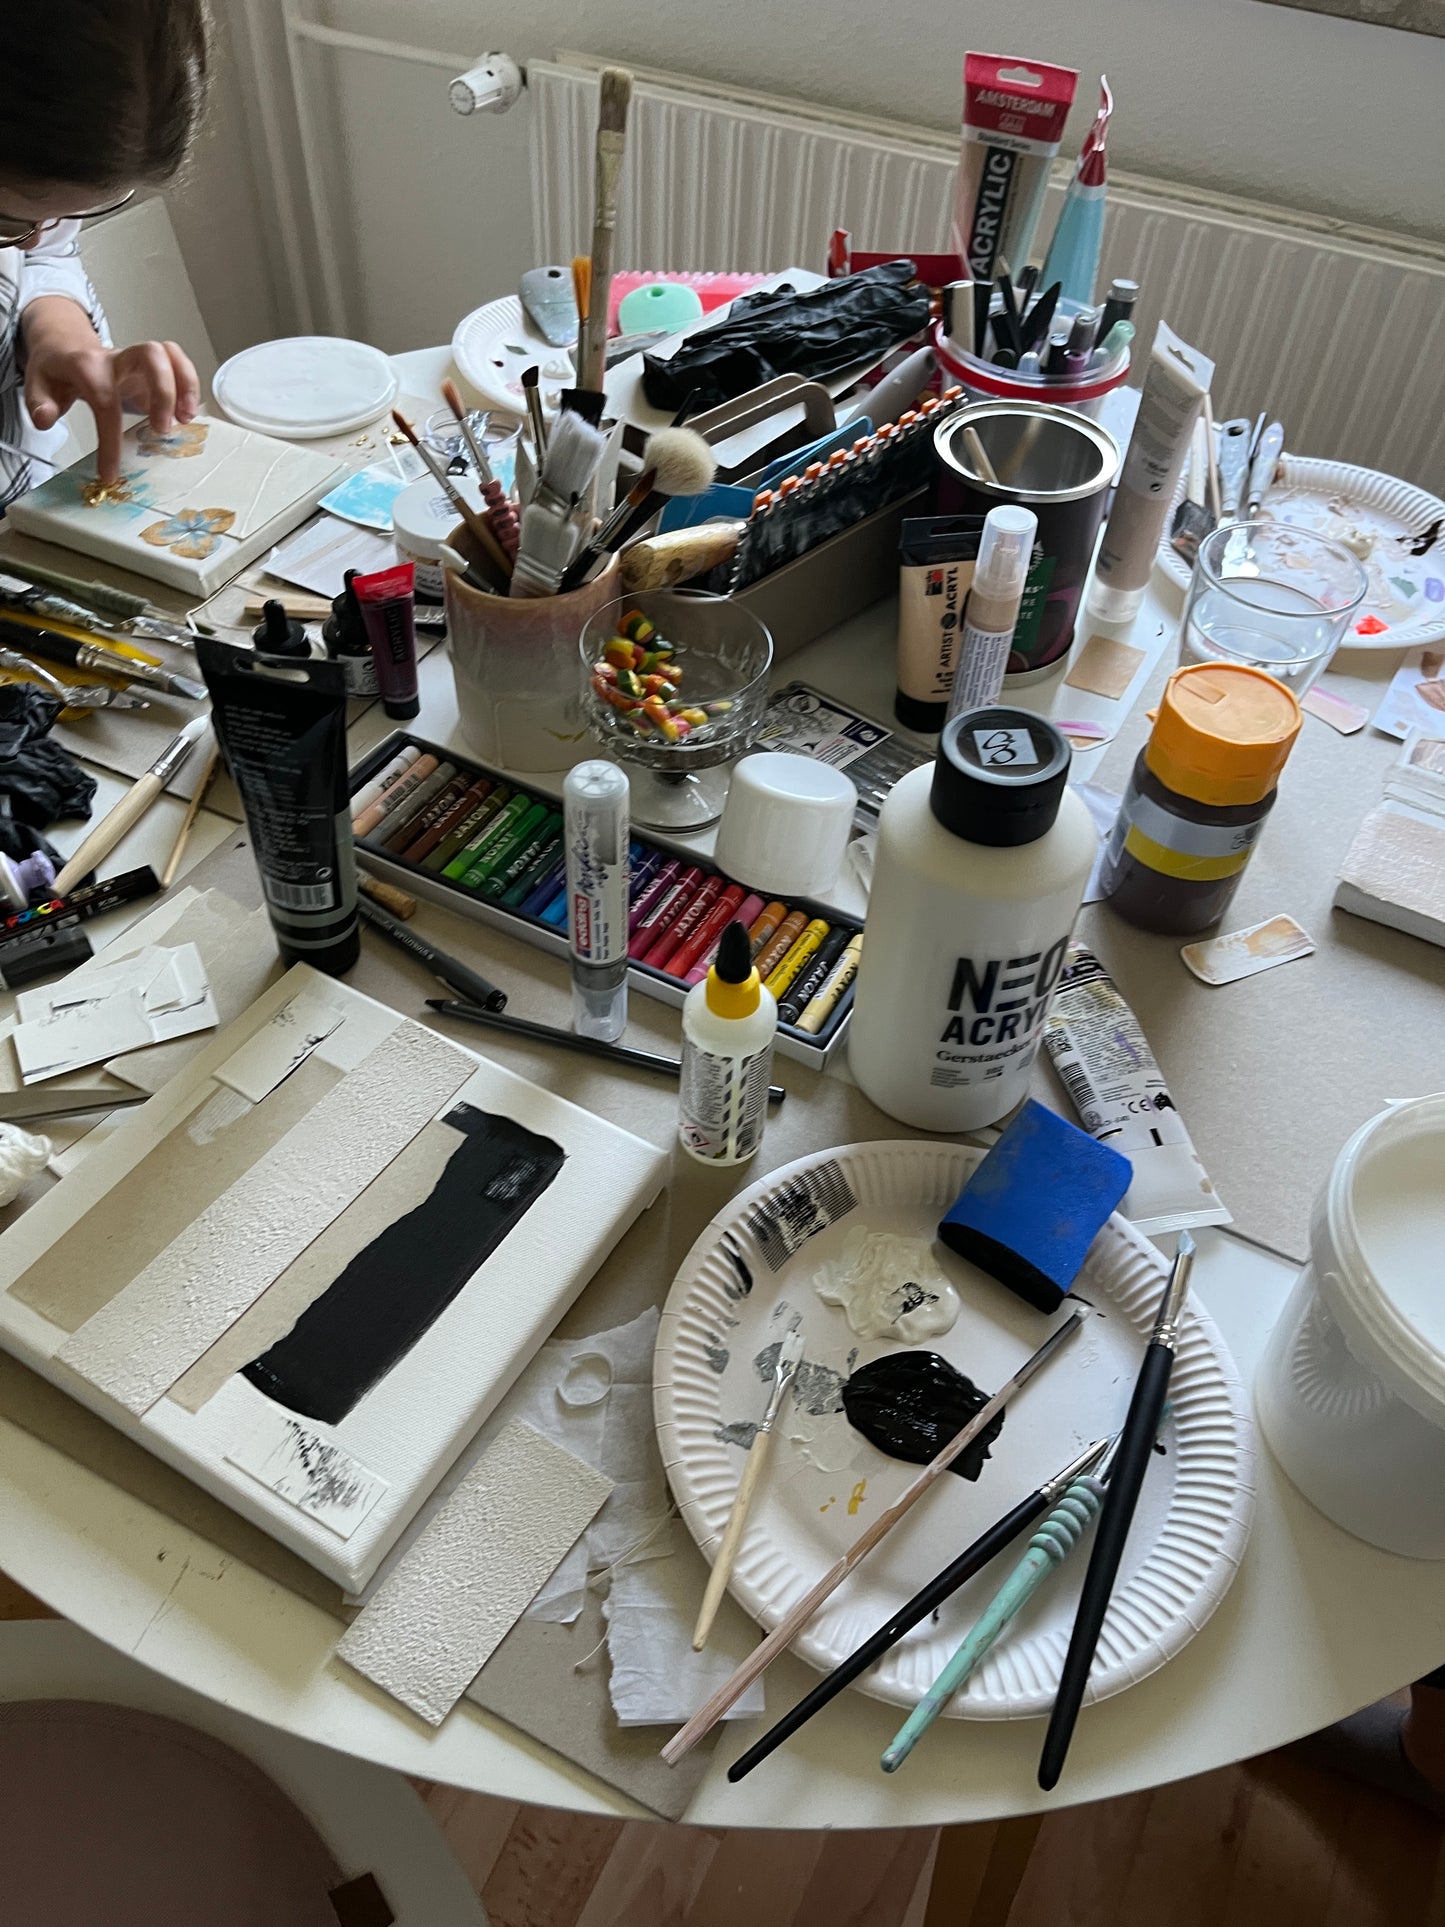 "Mixed Media Collage Art" Workshop with Anastasia in Flensburg, Germany